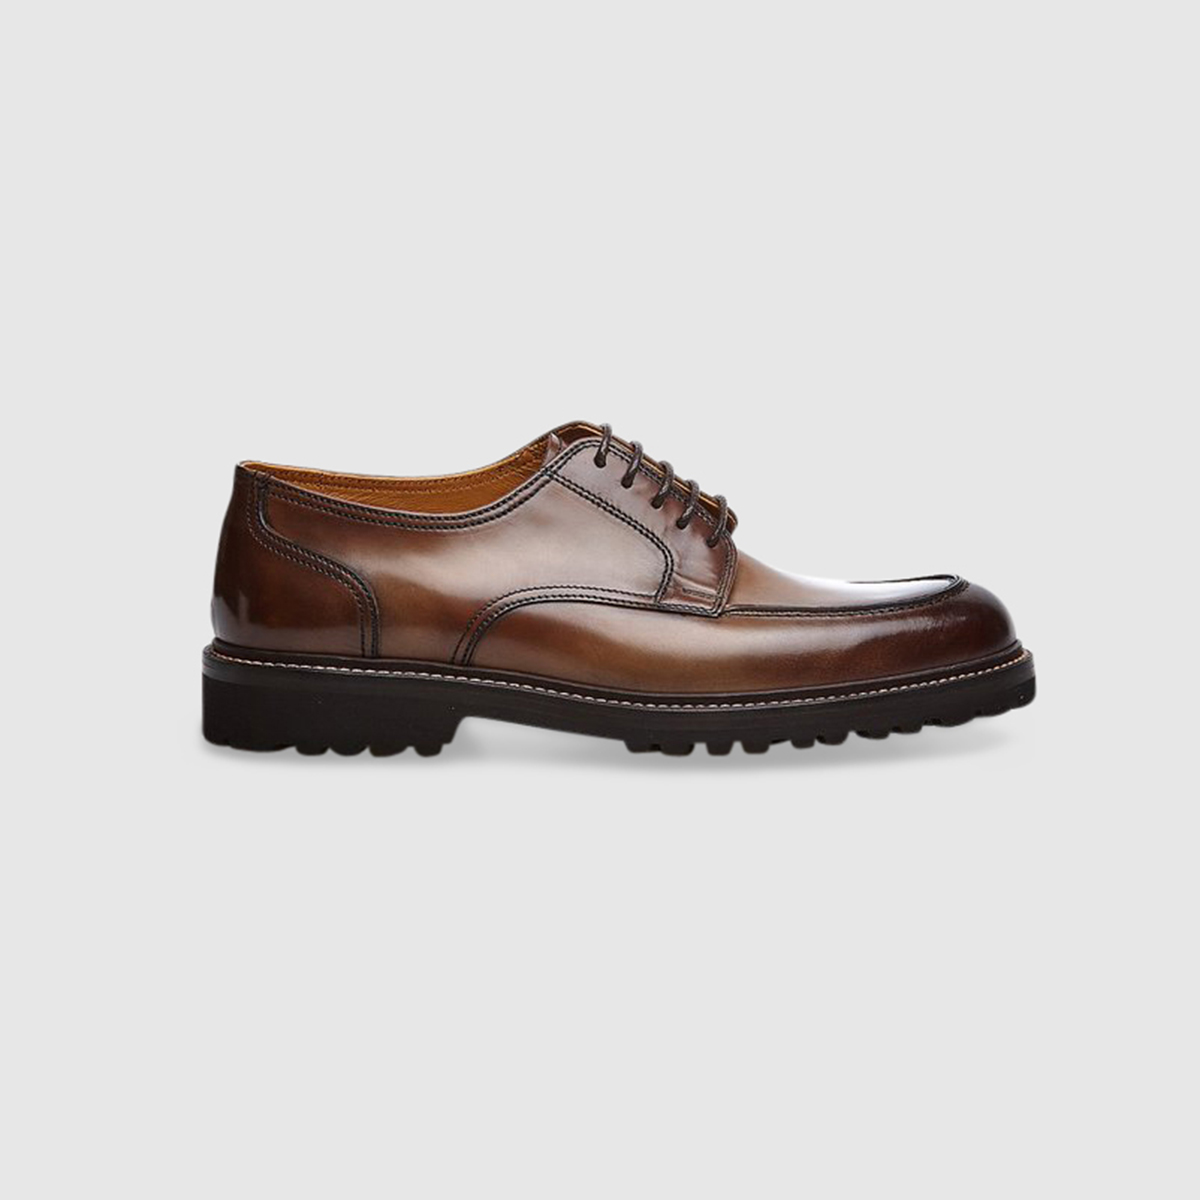 Five Hole Lace-up Shoes in Dark Brown Calfskin Gruppo Fabi on sale 2022